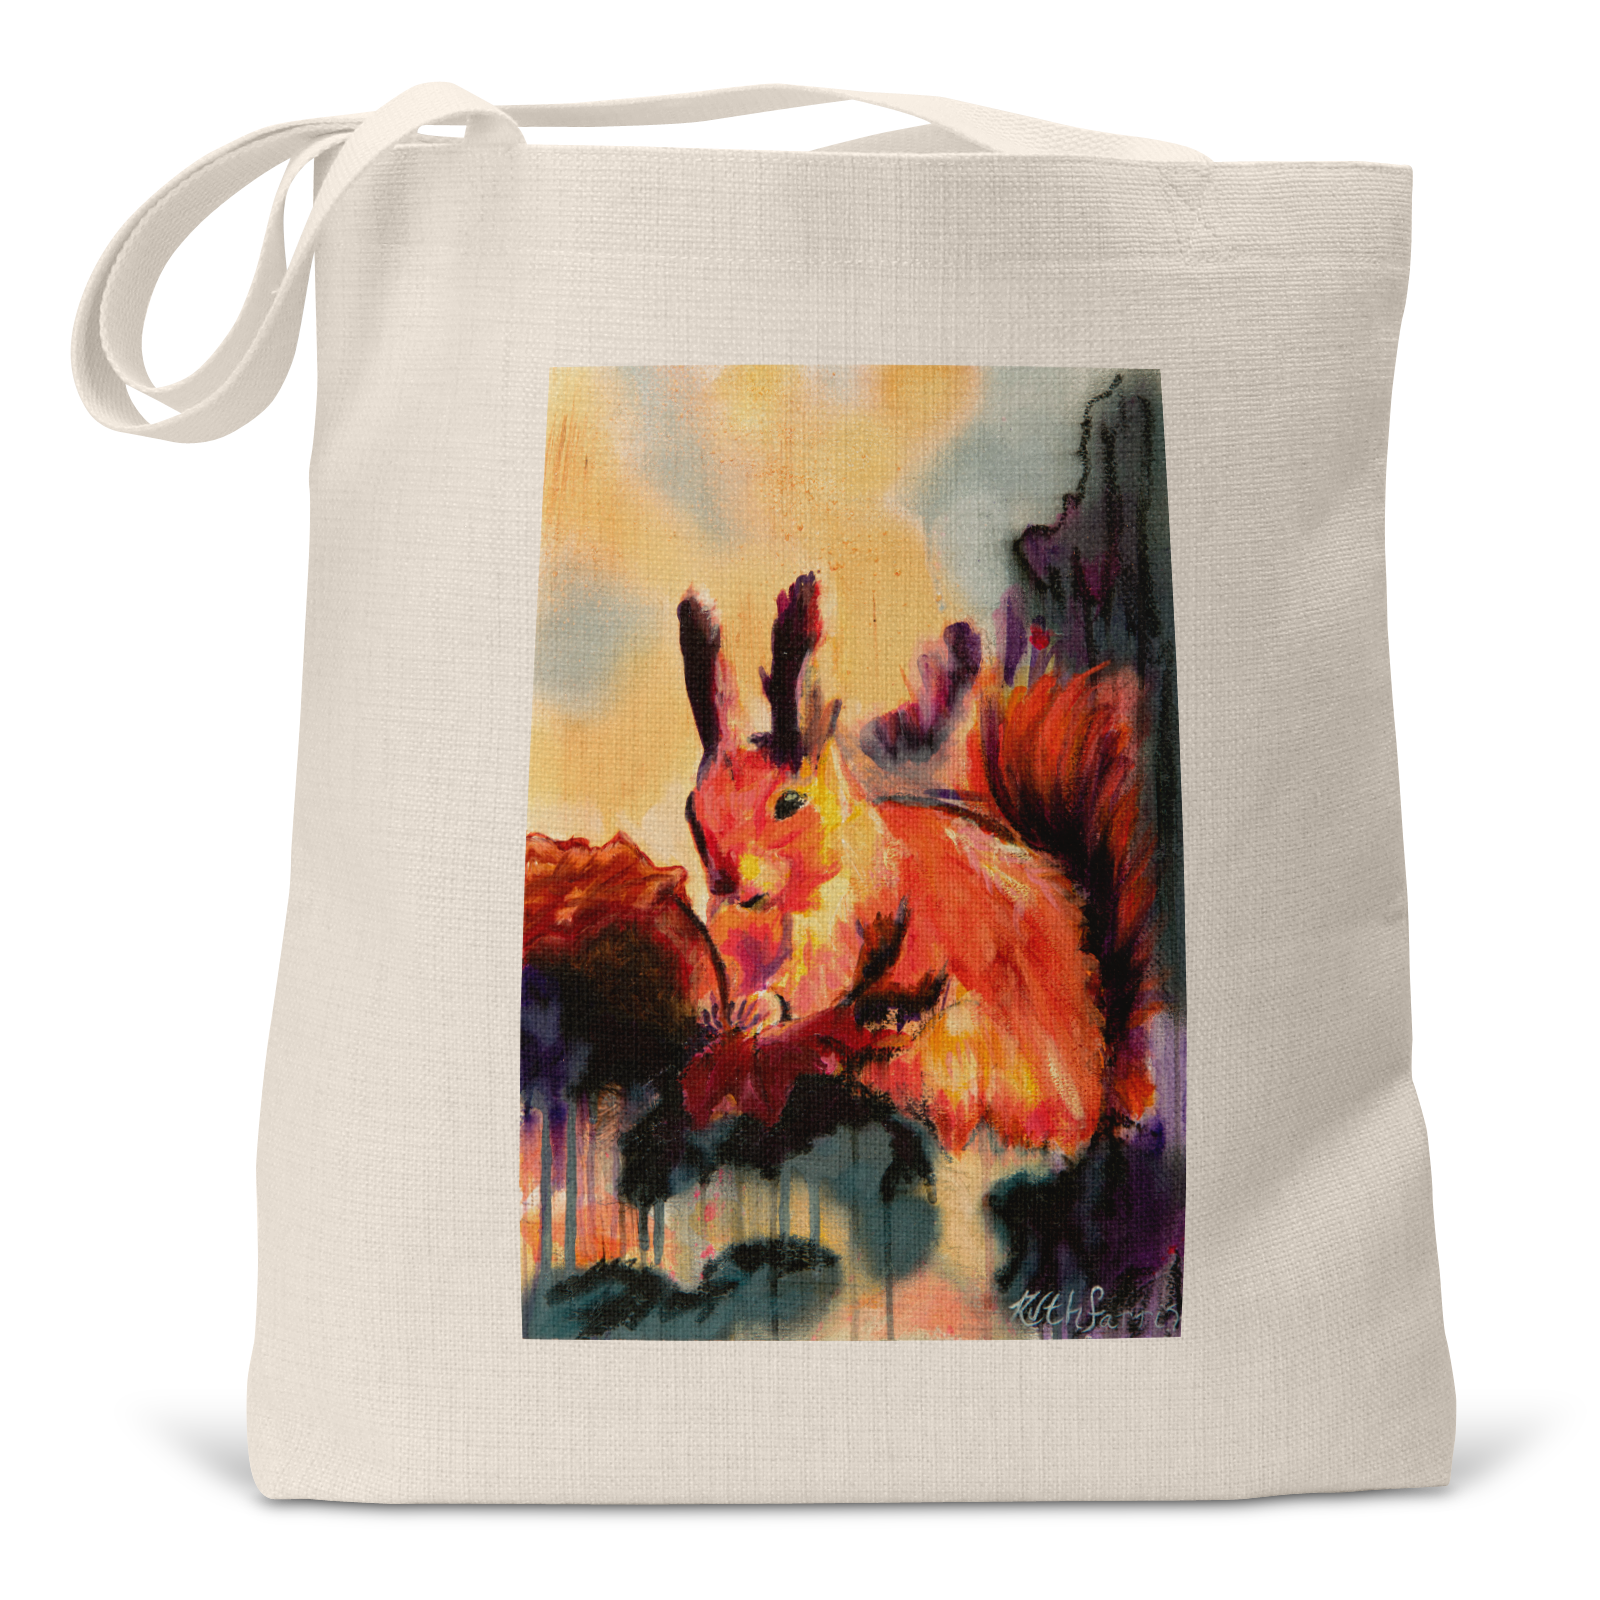 "A Squirrelish Fall Day" - Small/Large Tote Bag